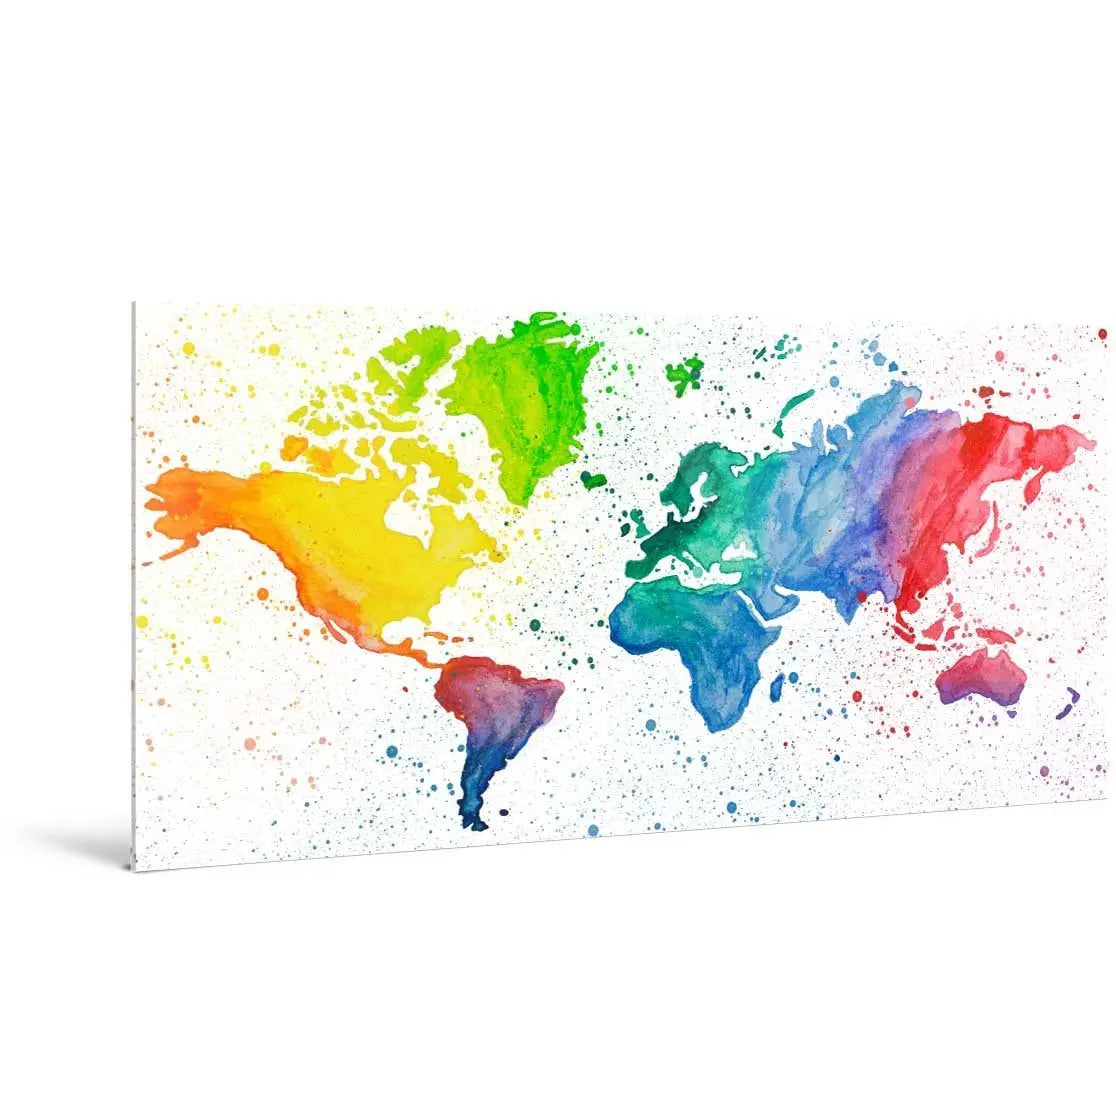 "COLORFUL WORLD" - Art For Everyone